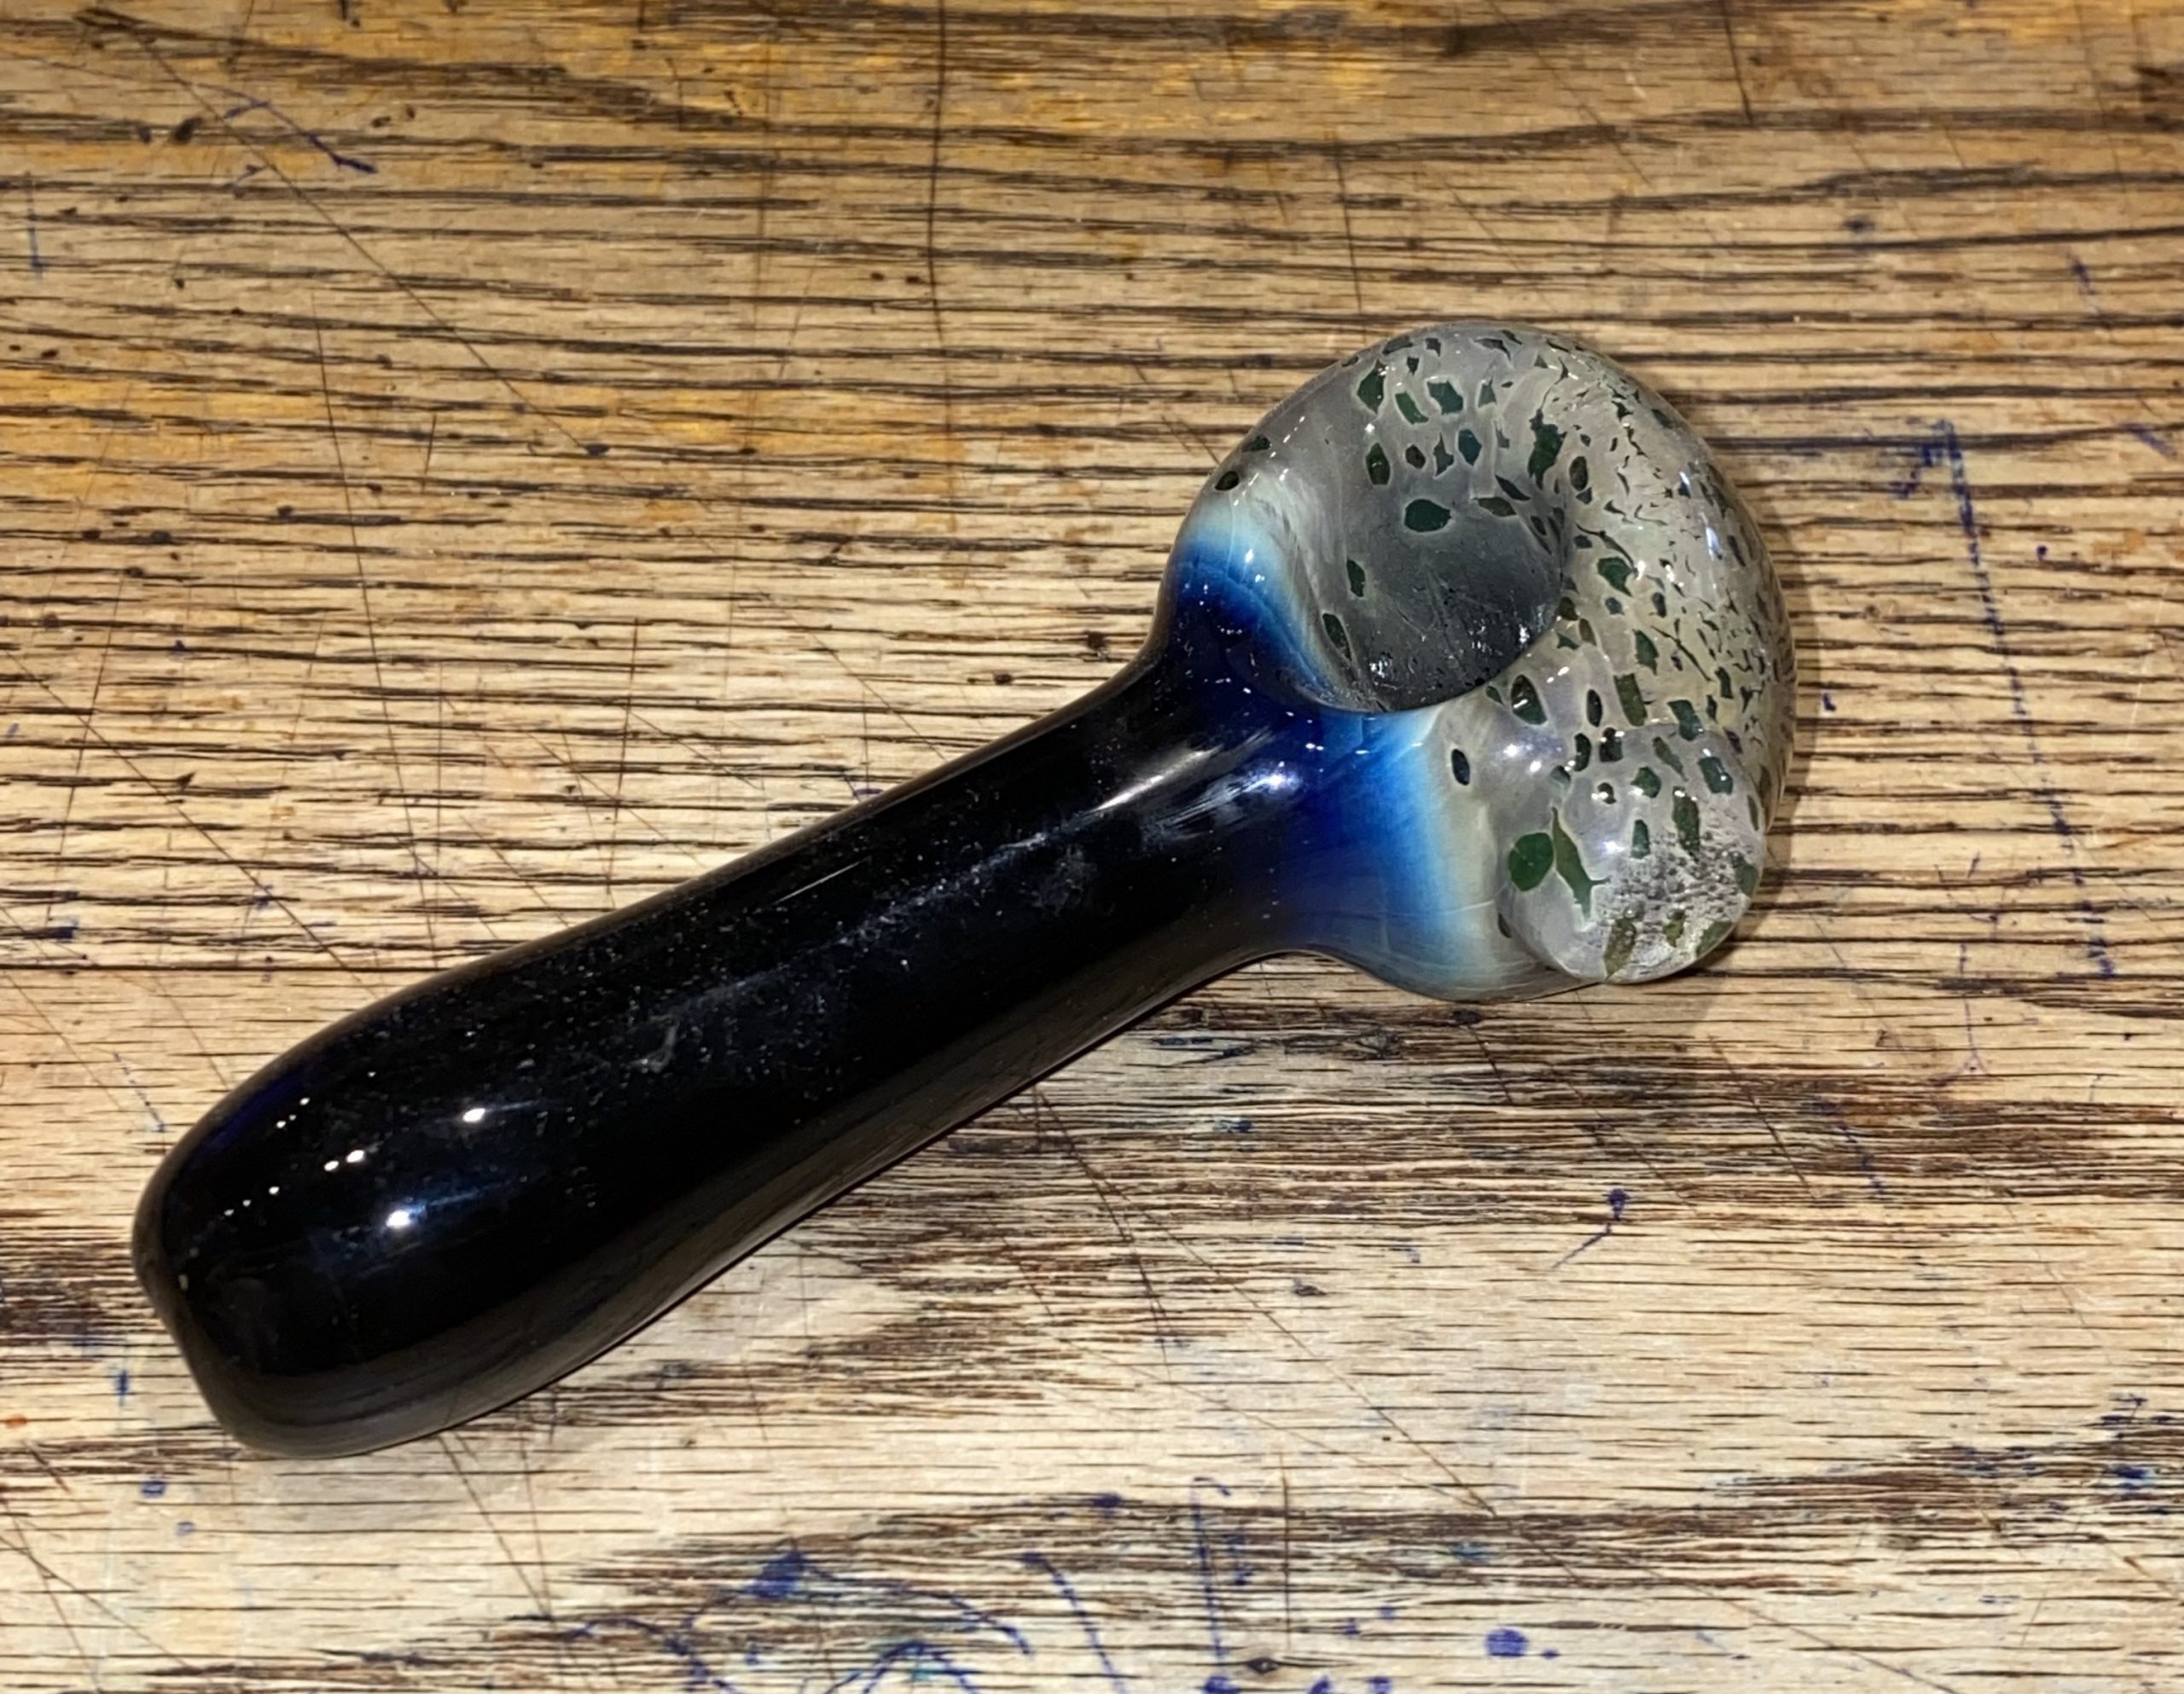 https://sunflowerpipes.com/wp-content/uploads/2020/11/water-and-earth-scaled.jpg